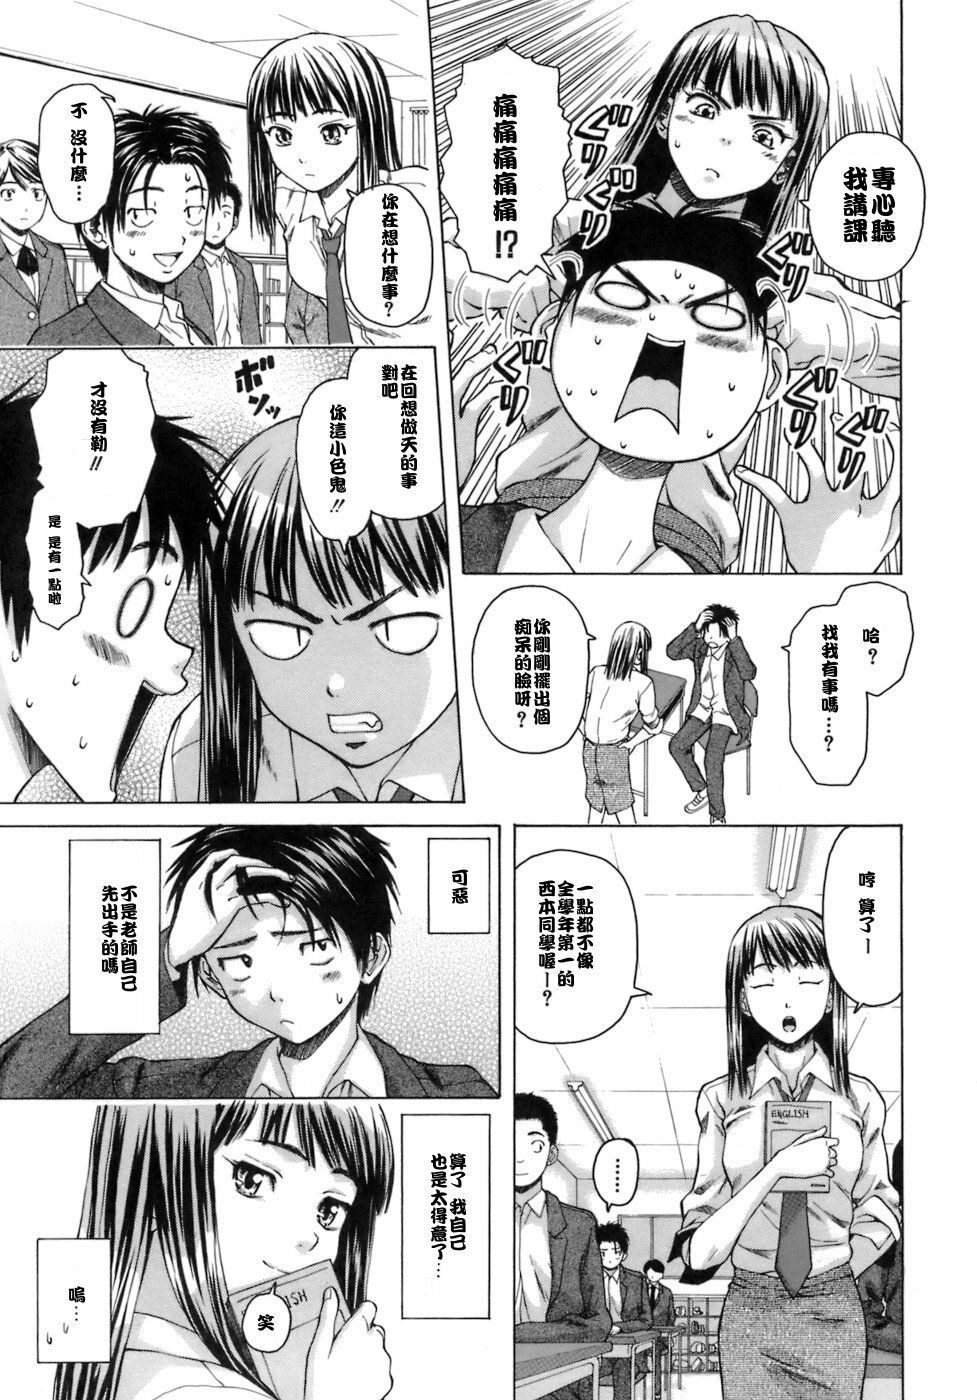 [Fuuga] Kyoushi to Seito to - Teacher and Student [Chinese] [悠月工房] page 44 full